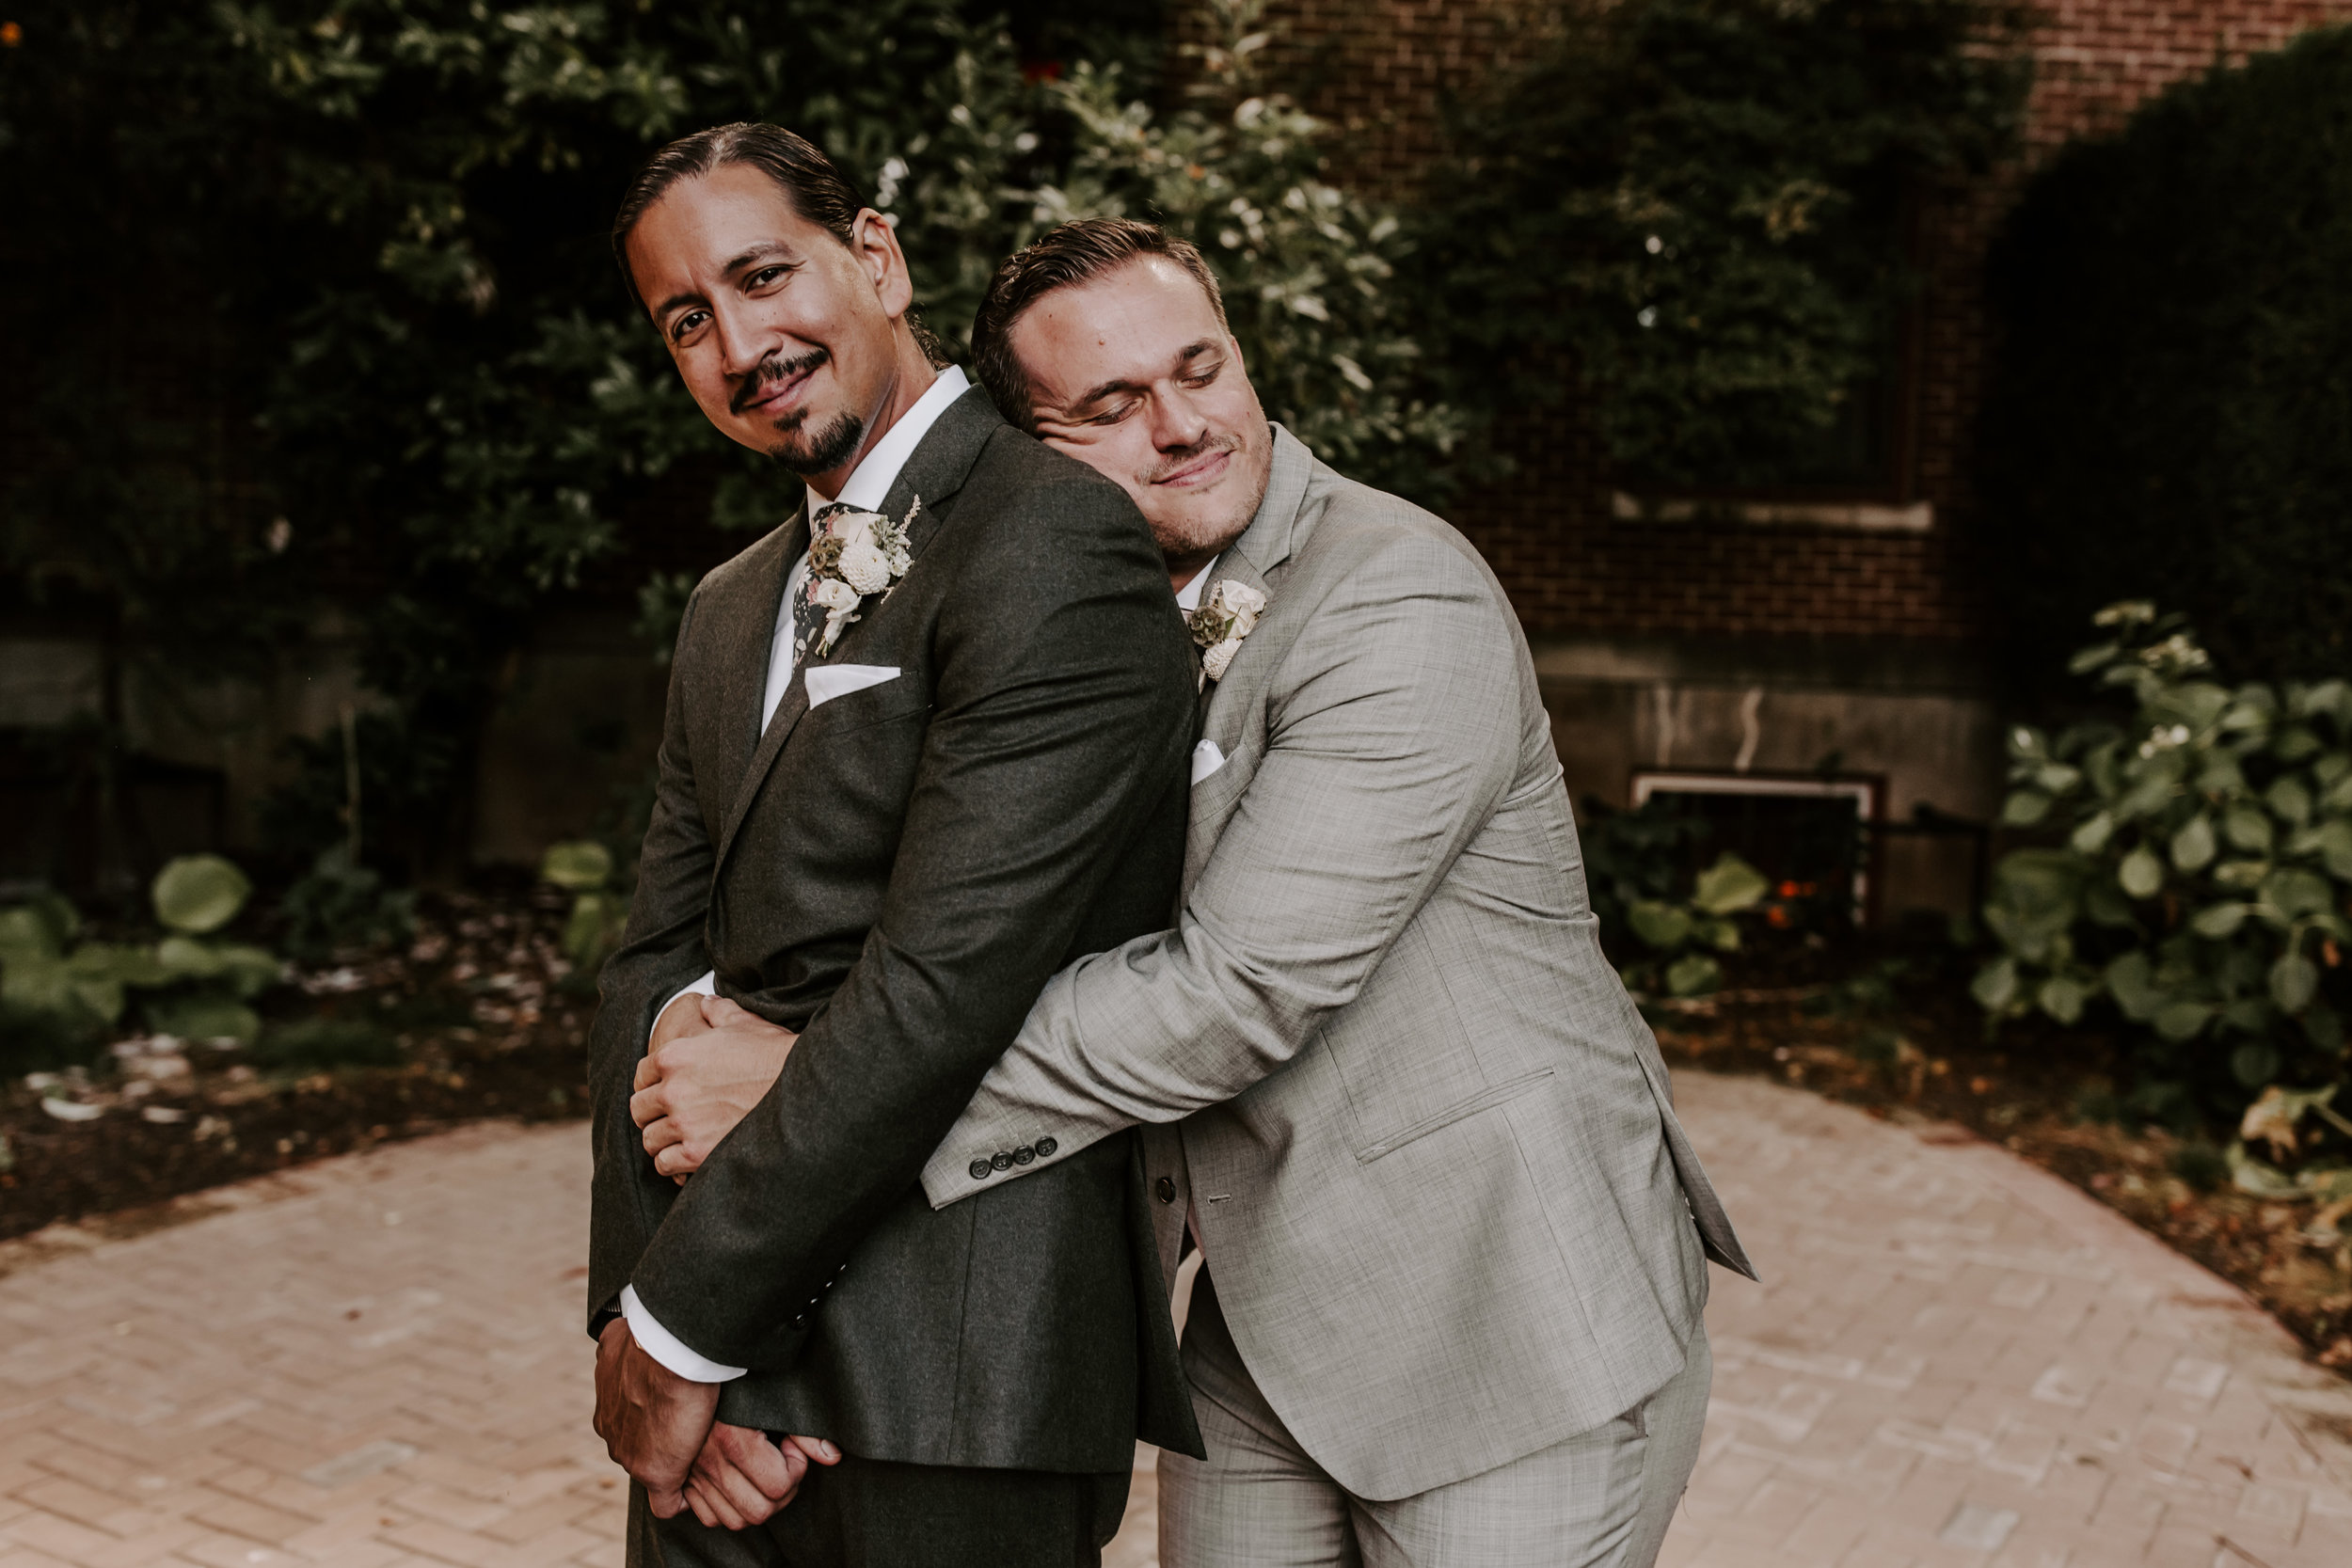 Rustic Bloom Photography | Groom Style Inspiration | McMenamins Grand Lodge